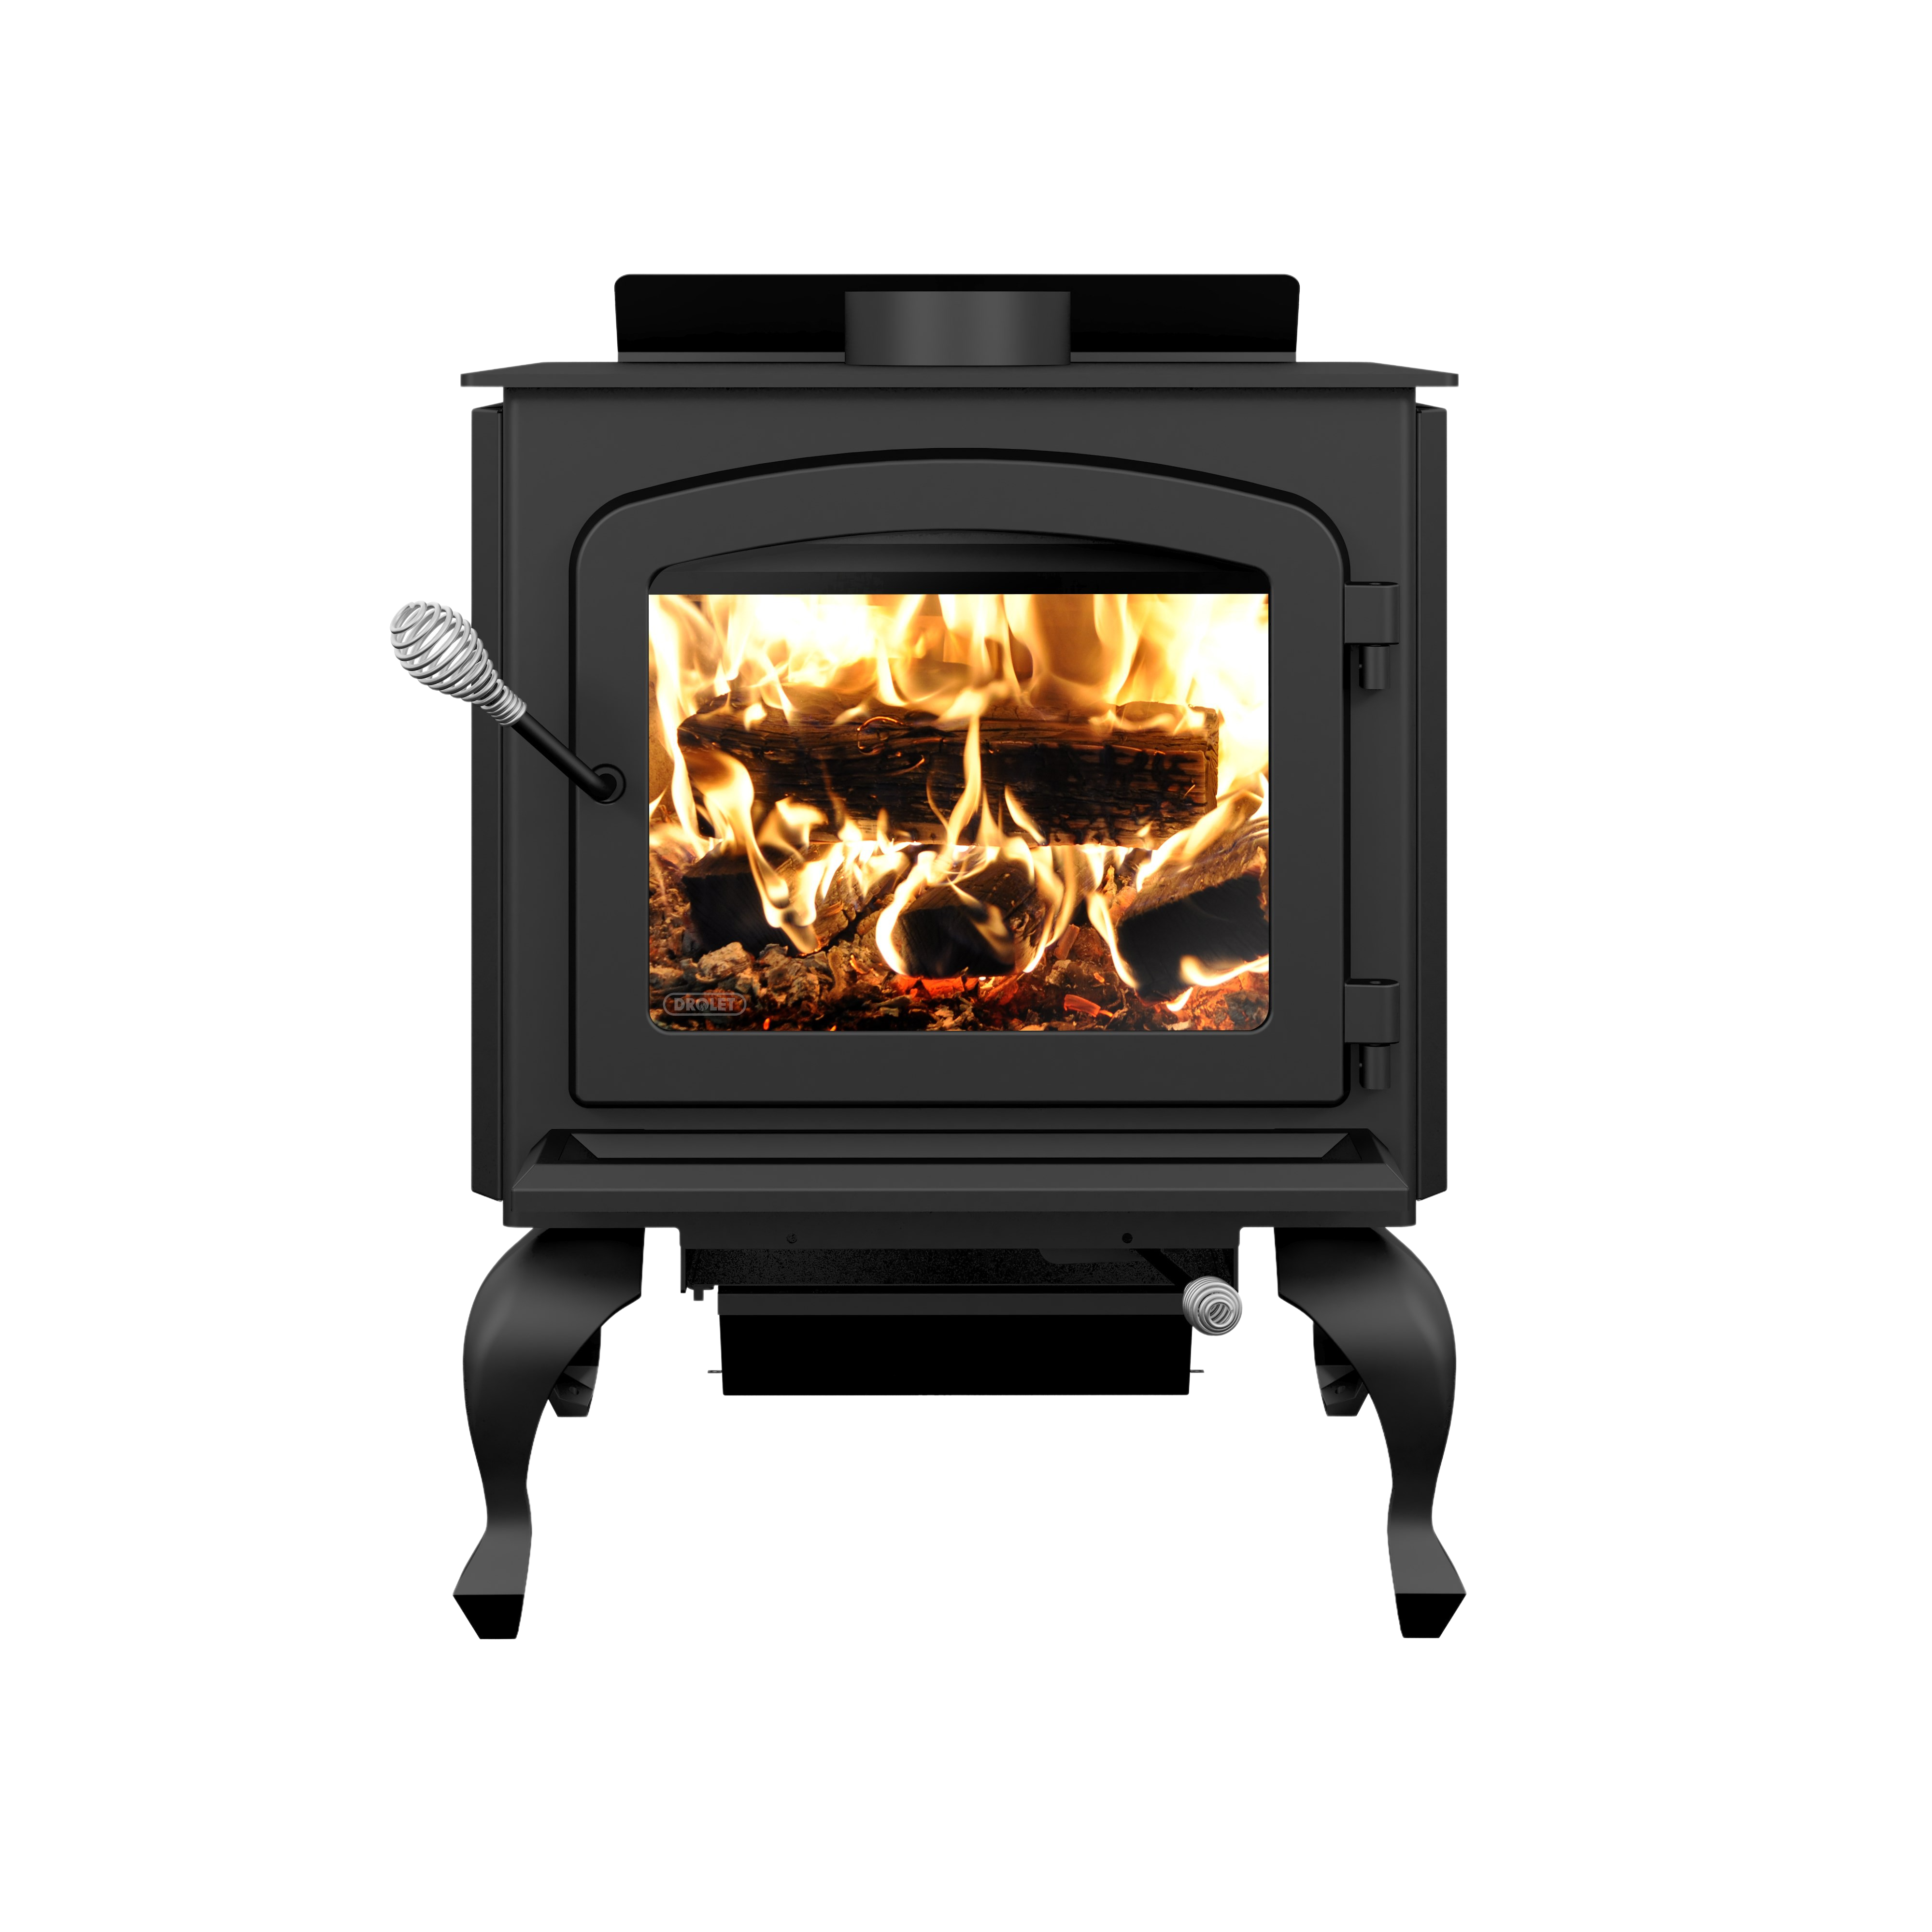 Drolet Legend lll EPA Certified 2,300 Sq. Ft. Wood Stove On Legs With Blower New